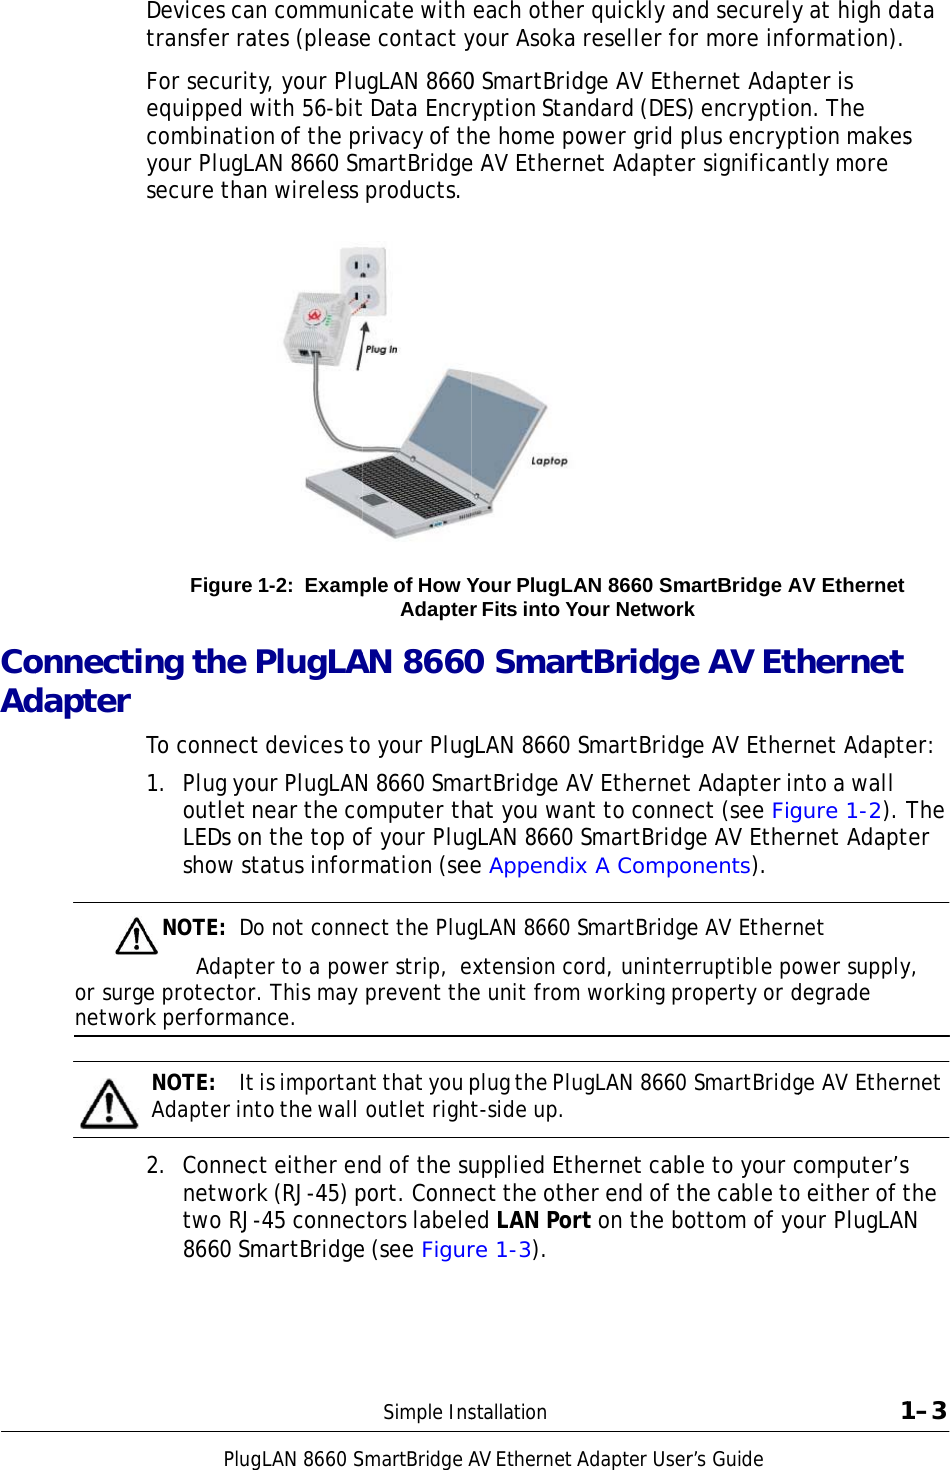      CoAd       onnectidapter or surgenetworPlugDevices catransfer raFor securitequipped wcombinatioyour PlugLsecure thaFigure ng the To connect1.  Plug yooutlet nLEDs onshow stNOTE:  DAdapte protectorrk performaNOTE:  ItAdapter in2.  Connecnetwortwo RJ8660 Sm     gLAN 8660San communates (pleasety, your Pluwith 56-biton of the pLAN 8660 Sman wireless 1-2: ExampPlugLAt devices toour PlugLANnear the con the top otatus informo not conneter to a powr. This may nce. t is importanto the wall ct either enrk (RJ-45) p-45 connecmartBridgeSmartBridgeAicate with e contact yugLAN 8660t Data Encryrivacy of thmartBridge products. ple of How YAdapterAN 8660o your PlugN 8660 Smaomputer thof your Plugmation (seeect the Plugwer strip,  e prevent thent that you p outlet rightnd of the suport. Connectors labelee (see FigurSimple InsAV EthernetA each otheryour Asoka 0 SmartBridyption Stanhe home poe AV EthernYour PlugLAr Fits into Yo0 SmartgLAN 8660 SartBridge AVhat you wangLAN 8660 e AppendixgLAN 8660 Sxtension coe unit fromplug the Plut-side up. upplied Ethect the otheed LAN Porre 1-3). stallationAdapter Userr quickly an reseller fodge AV Ethendard (DES)ower grid pnet Adapter AN 8660 Smour NetworktBridgeSmartBridgV Ethernetnt to conneSmartBridgx A CompoSmartBridgeord, uninter working prugLAN 8660 hernet cabler end of thrt on the bor’s Guide nd securelyr more infoernet Adap) encryptioplus encrypr significanmartBridge Ak e AV Ethge AV Ethert Adapter inect (see Figge AV Etheronents). e AV Ethernrruptible poroperty or d SmartBridgle to your che cable toottom of yoy at high daormation). pter is on. The ption makesntly more AV Ethernet hernet rnet Adaptento a wall gure 1-2). Trnet Adaptnet  ower supplydegrade ge AV Ethercomputer’so either of tour PlugLAN1ata  s er: The ter y, rnet s the N 1–3 